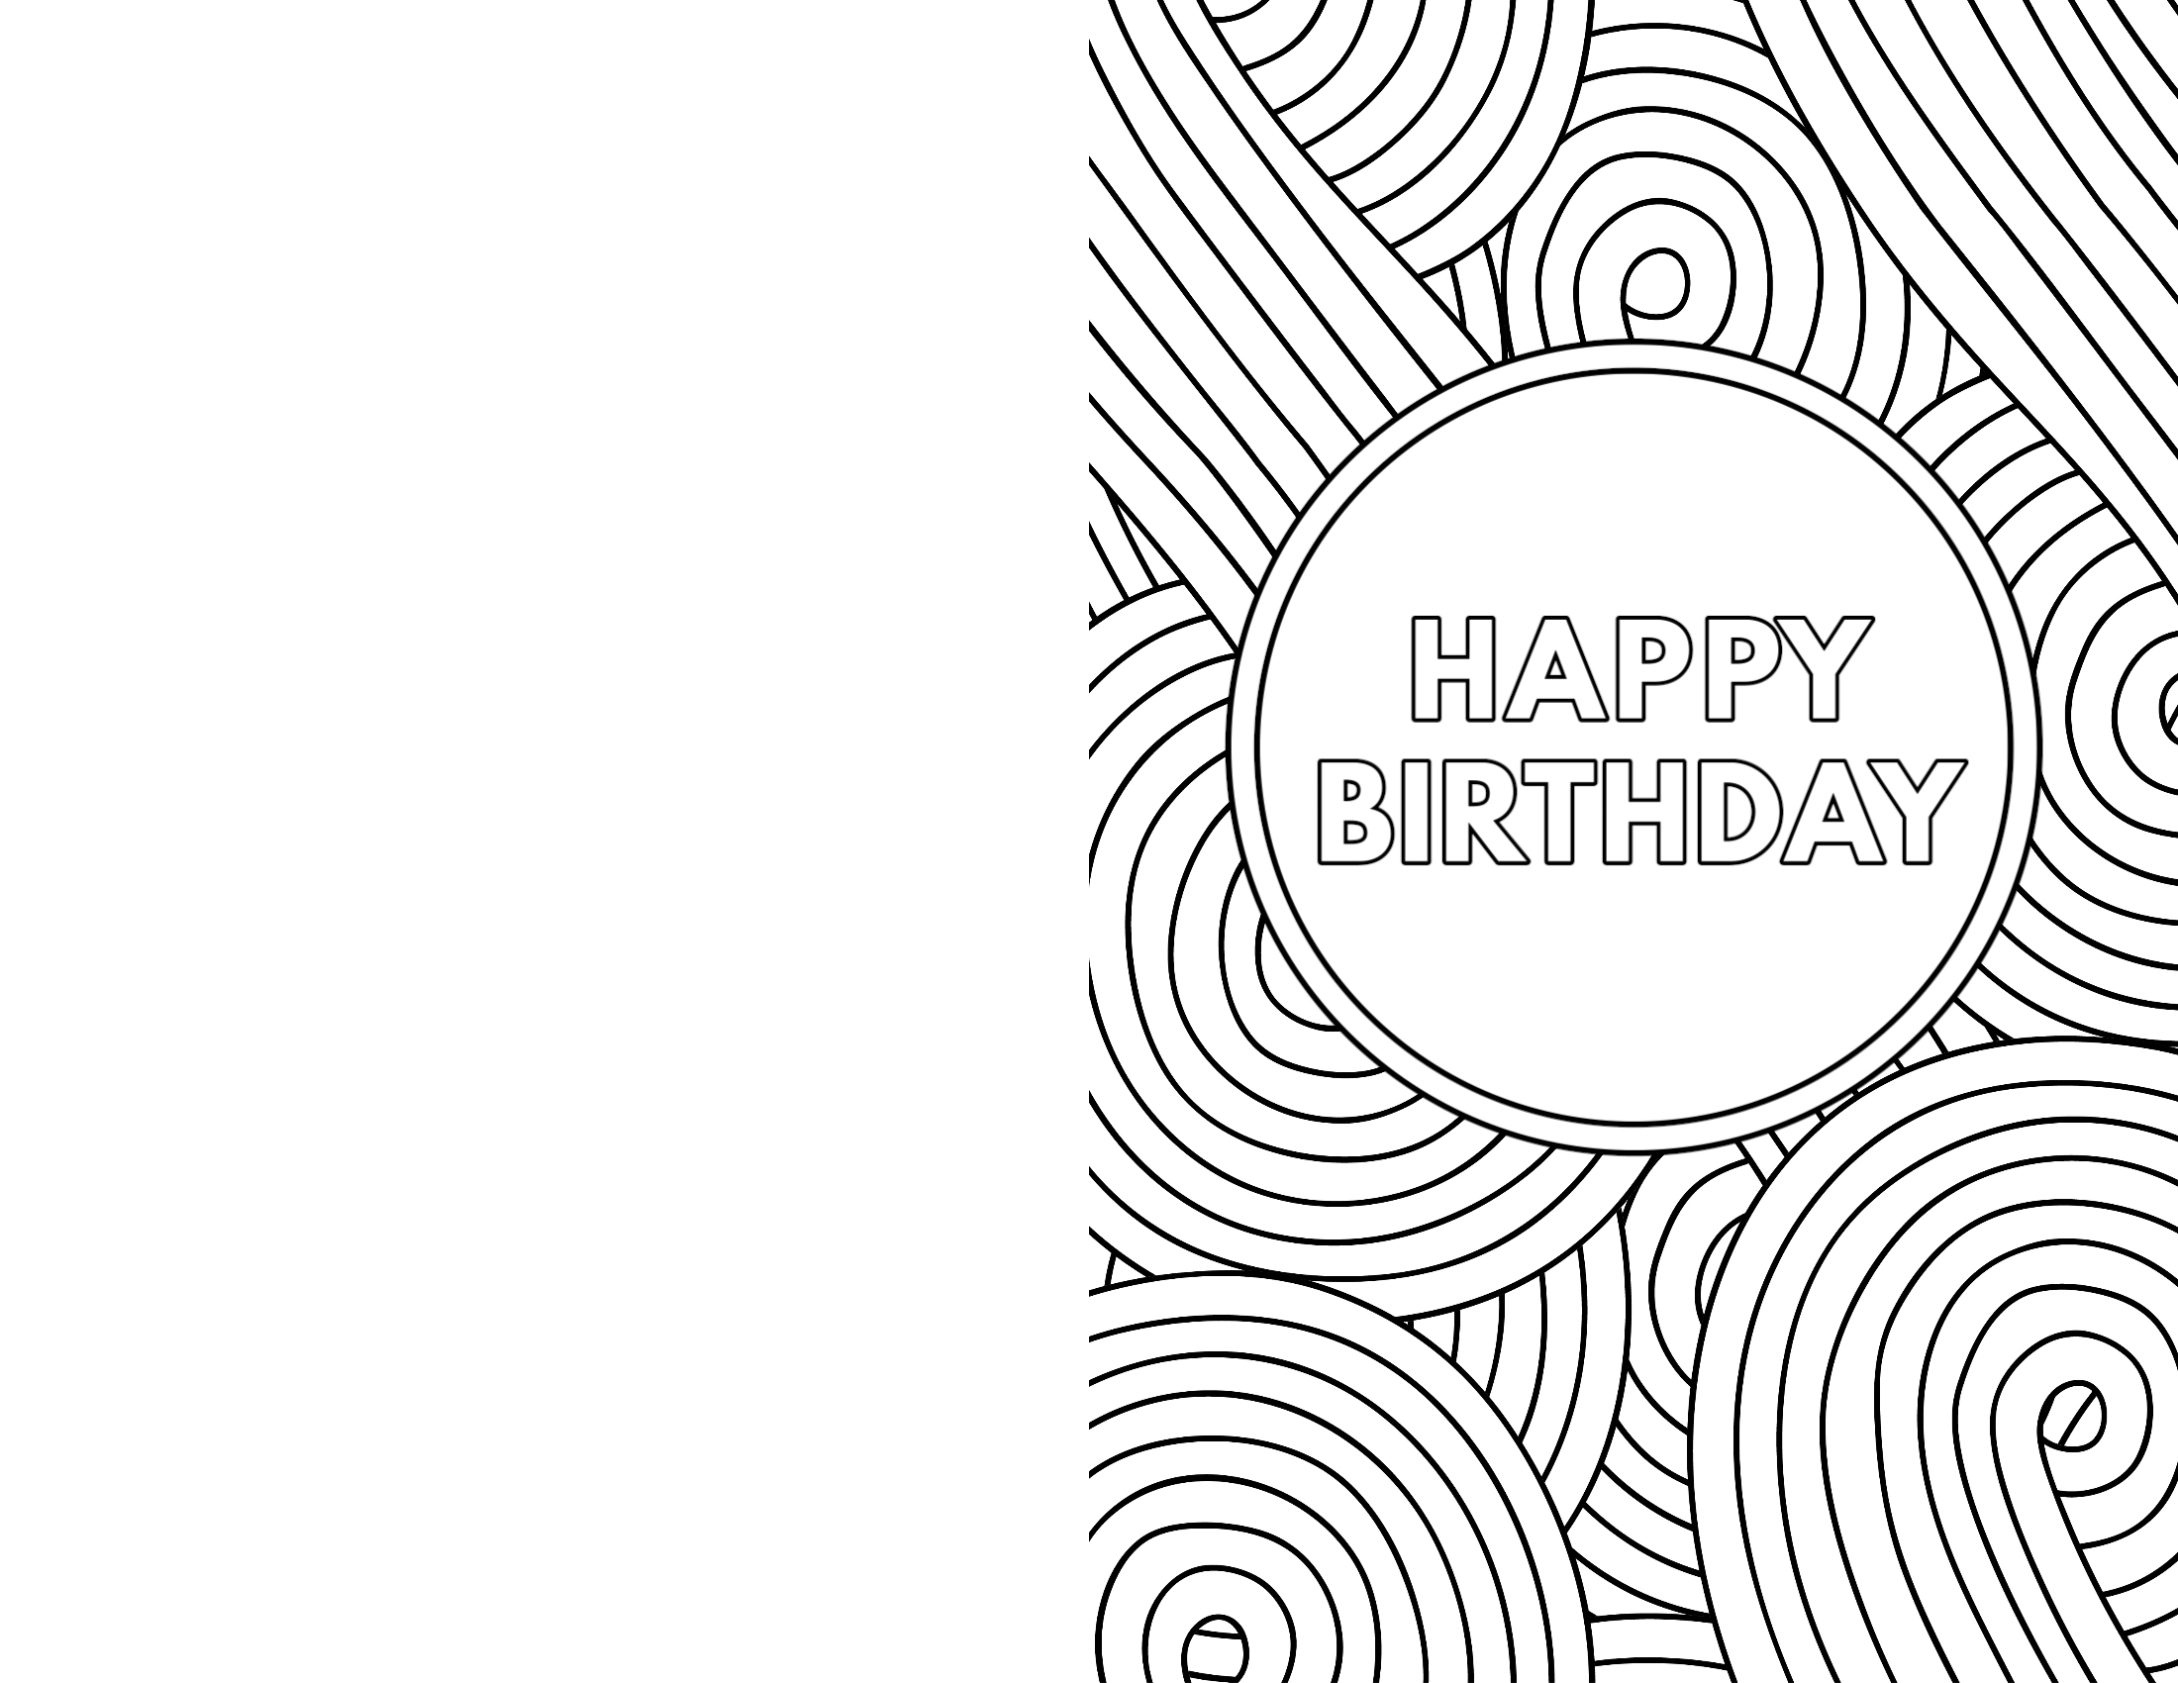 Free Printable Birthday Cards – Paper Trail Design With Fold Out Card Template